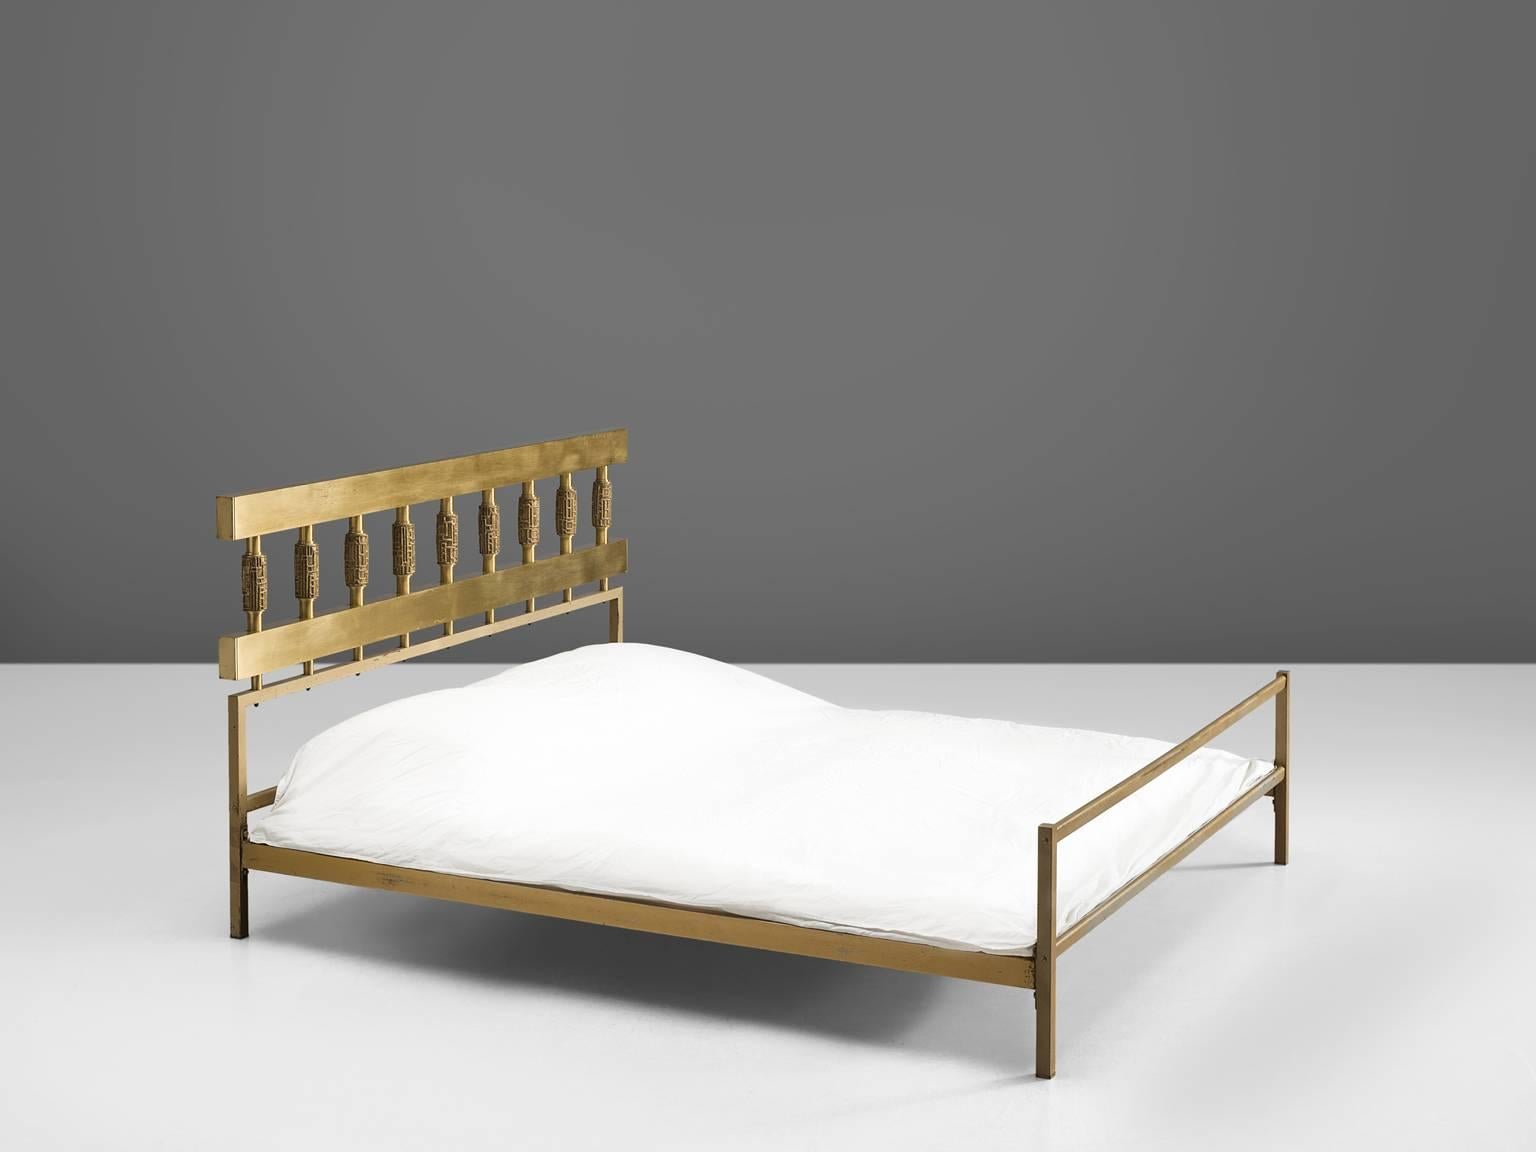 Bedframe, in brass, by Luciano Frigerio, Italy, 1960s. 

Wonderfully large bed frame by the Italian Luciano Frigerio. The frame is simplistic, through which all the attention is drawn to the headboard. The headboard is beautifully cast with highly